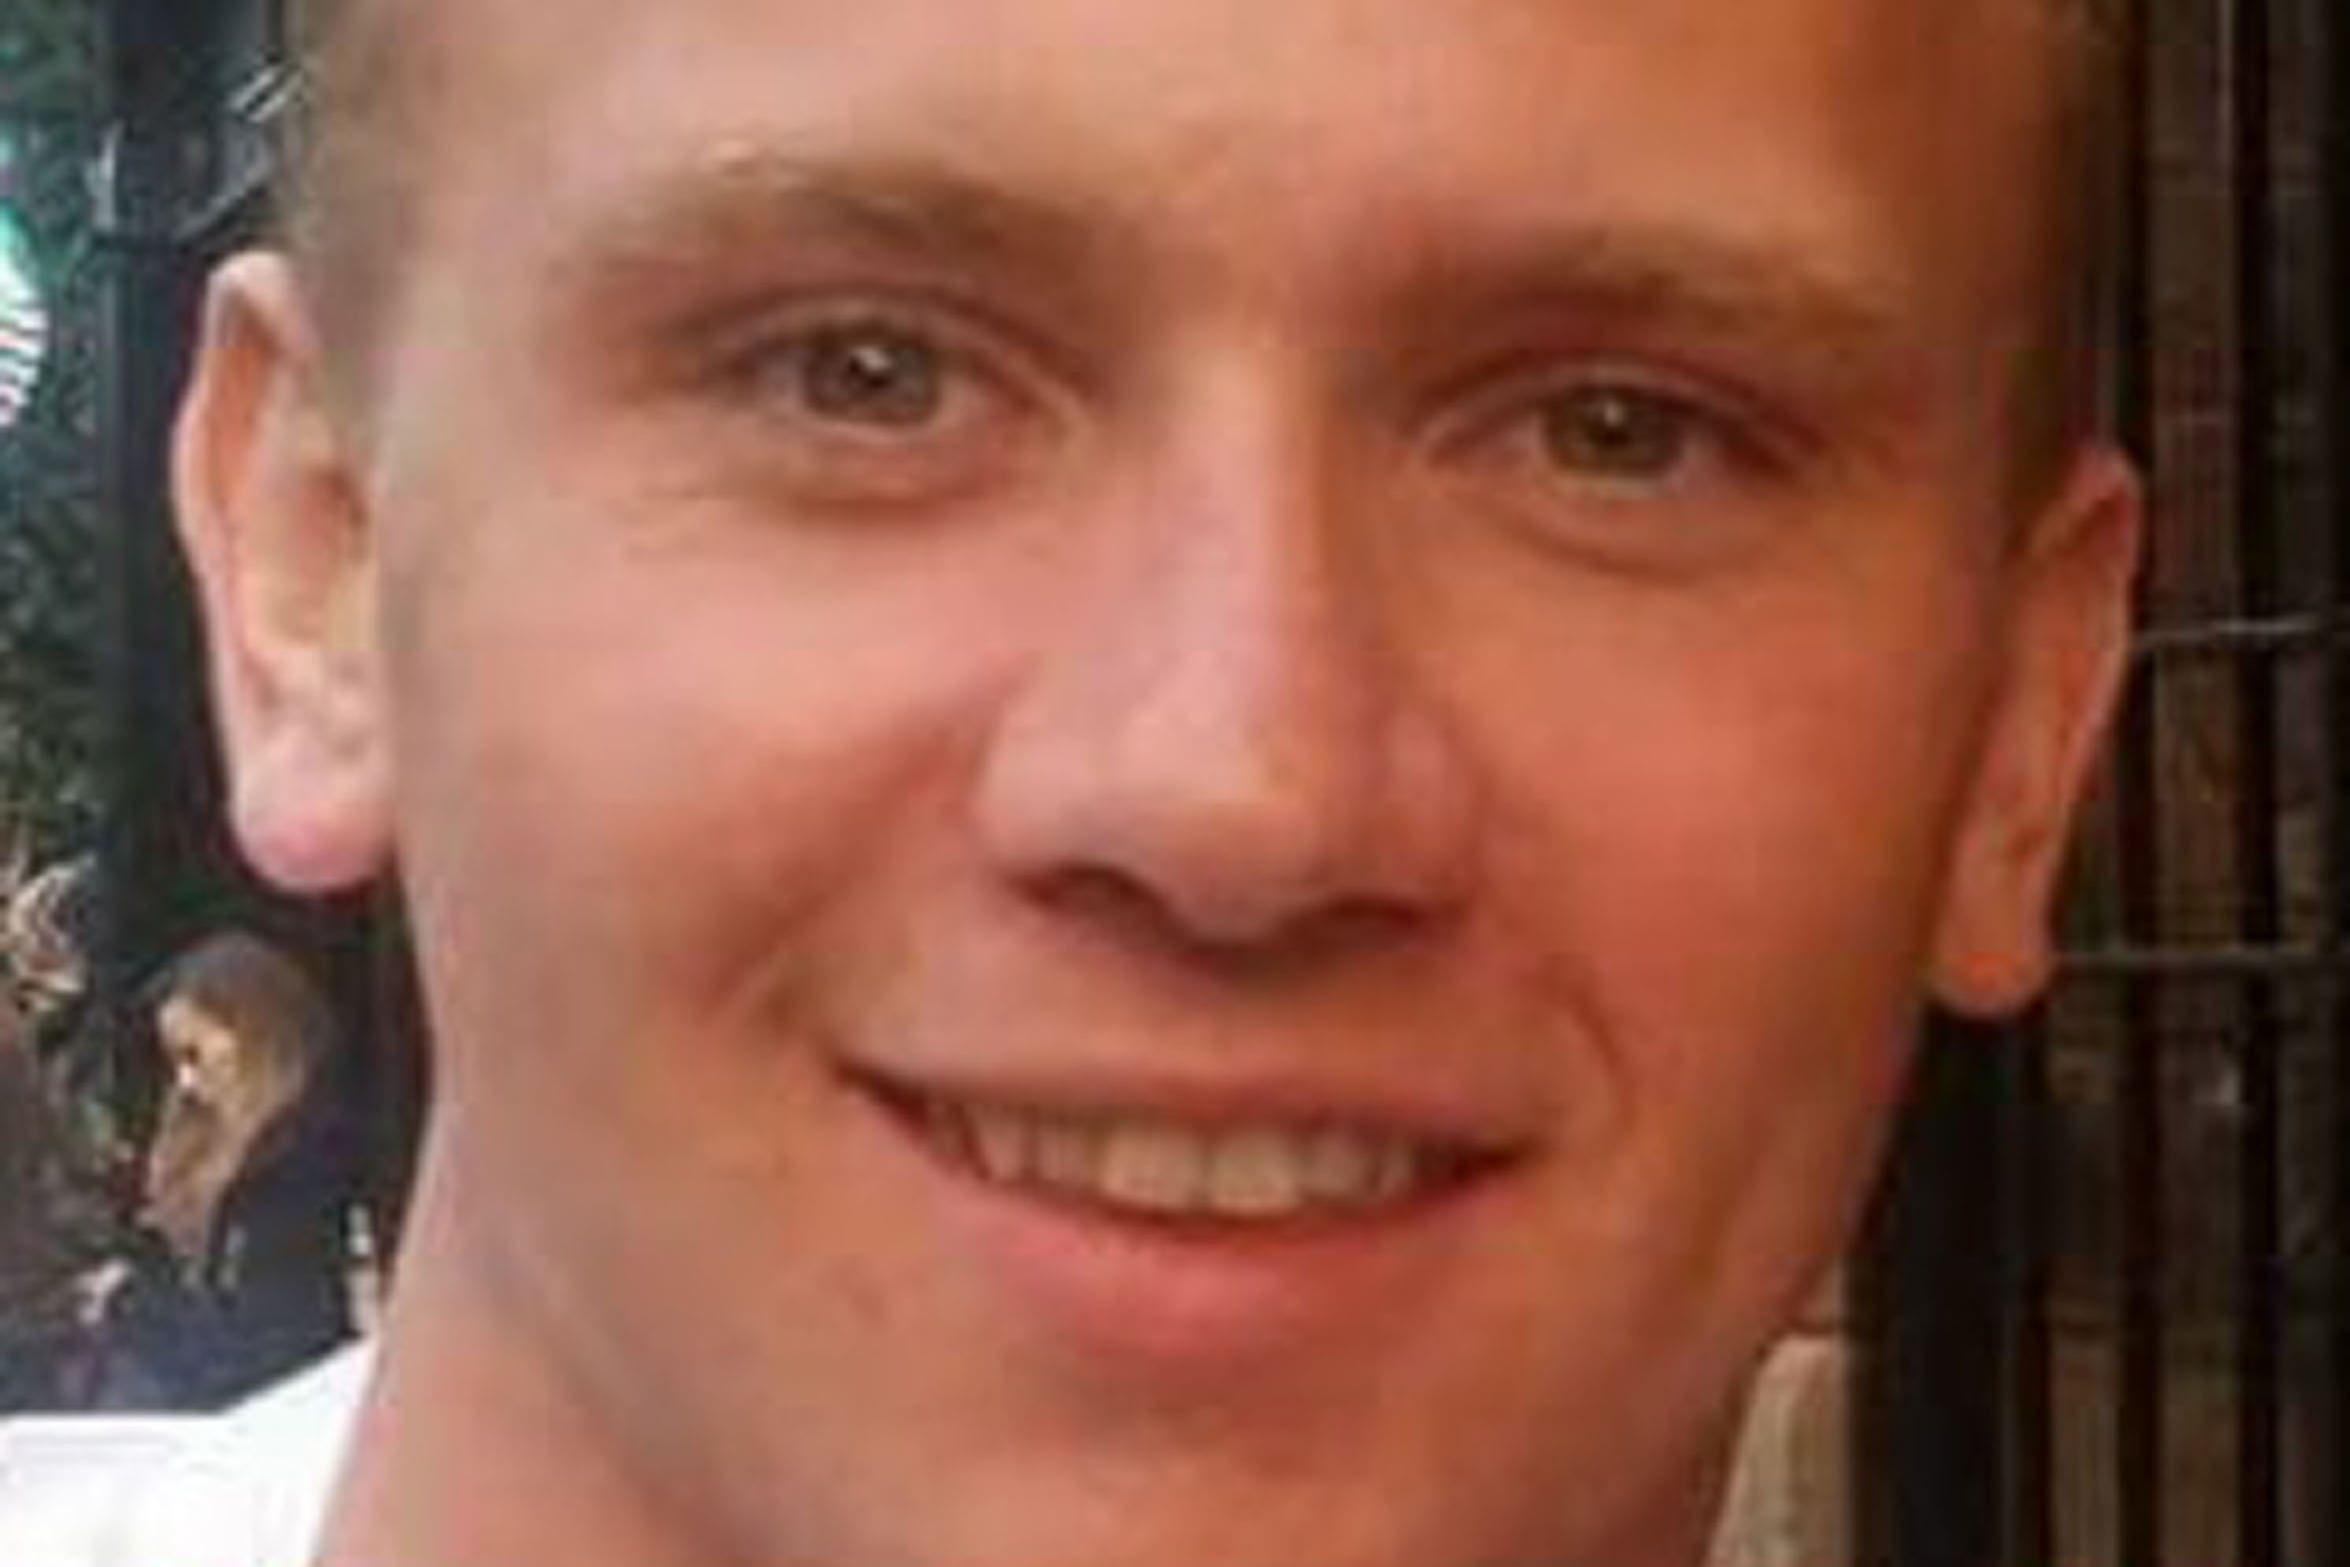 Corrie McKeague was 23 when he vanished in the early hours of September 24 2016 on a night out in Bury St Edmunds, Suffolk (Suffolk Police/ PA)